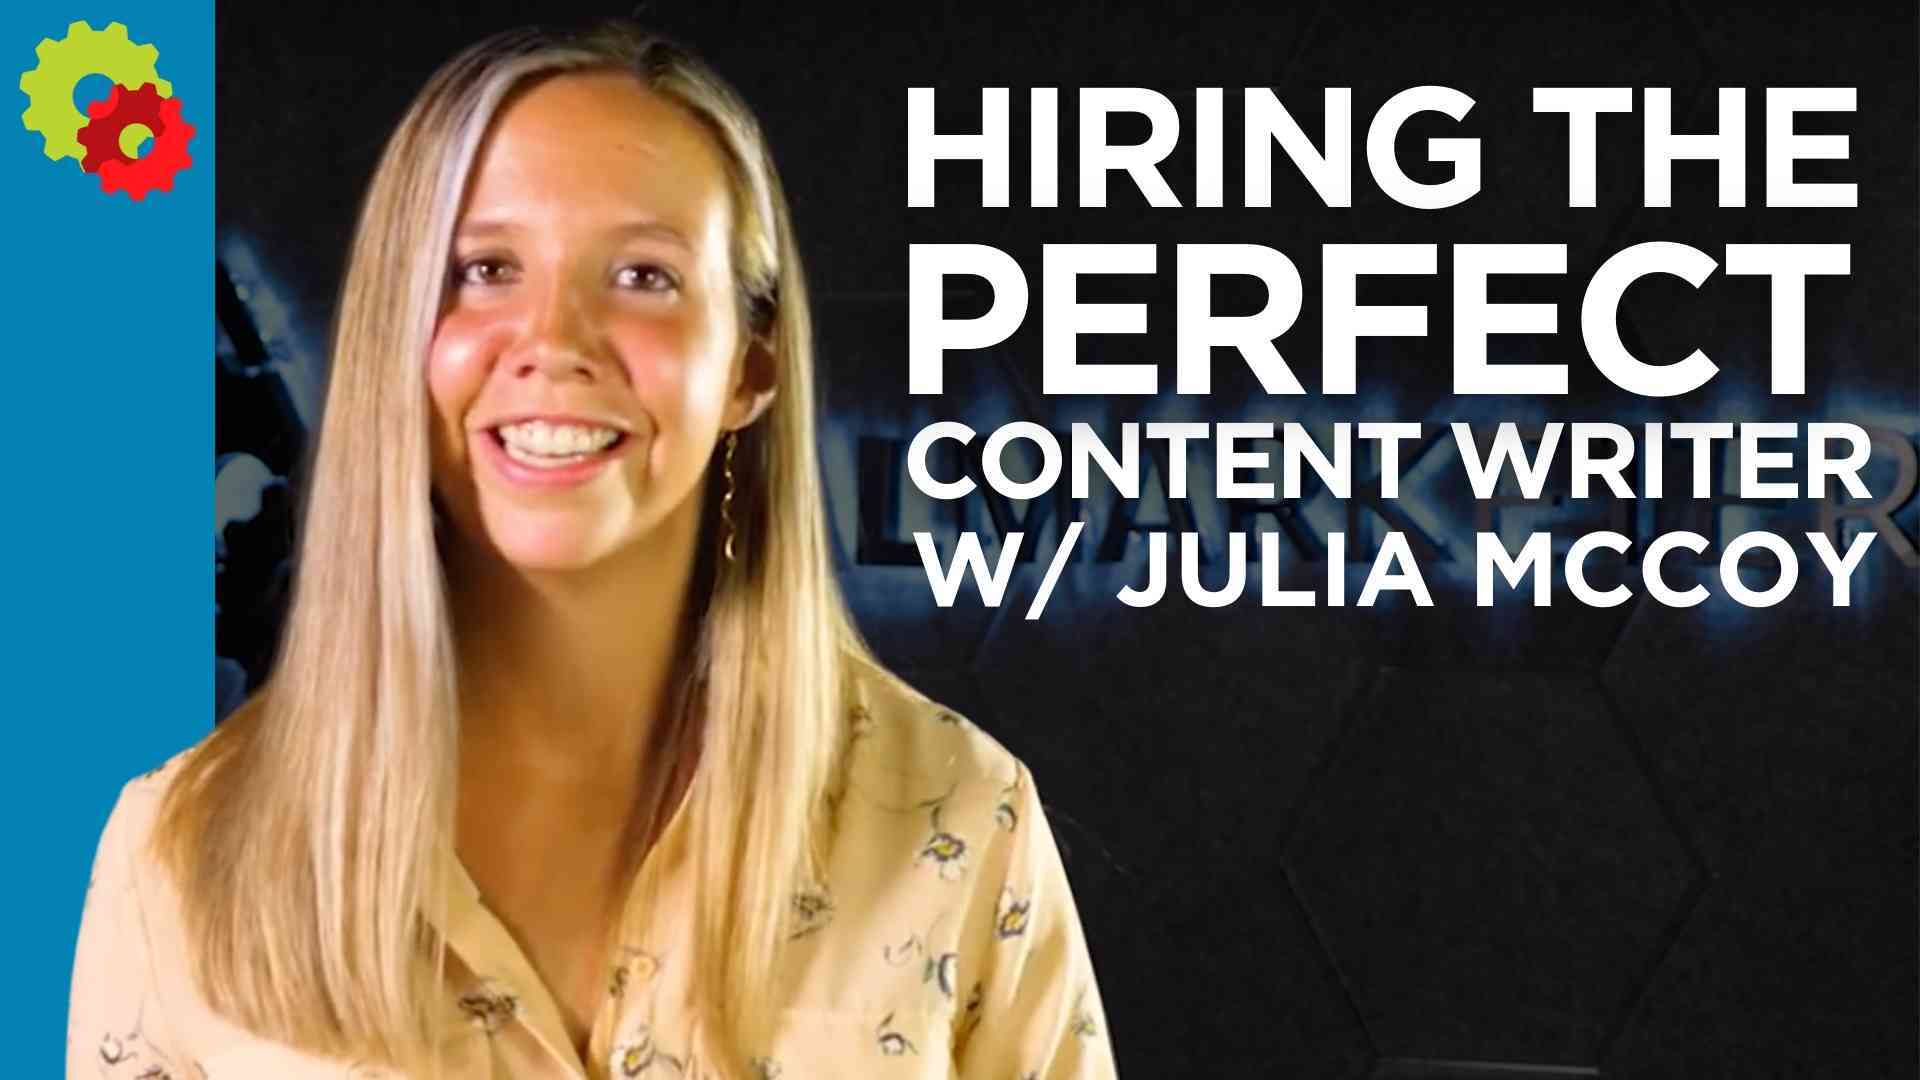 Hiring the Perfect Content Writer with Julia McCoy [VIDEO]